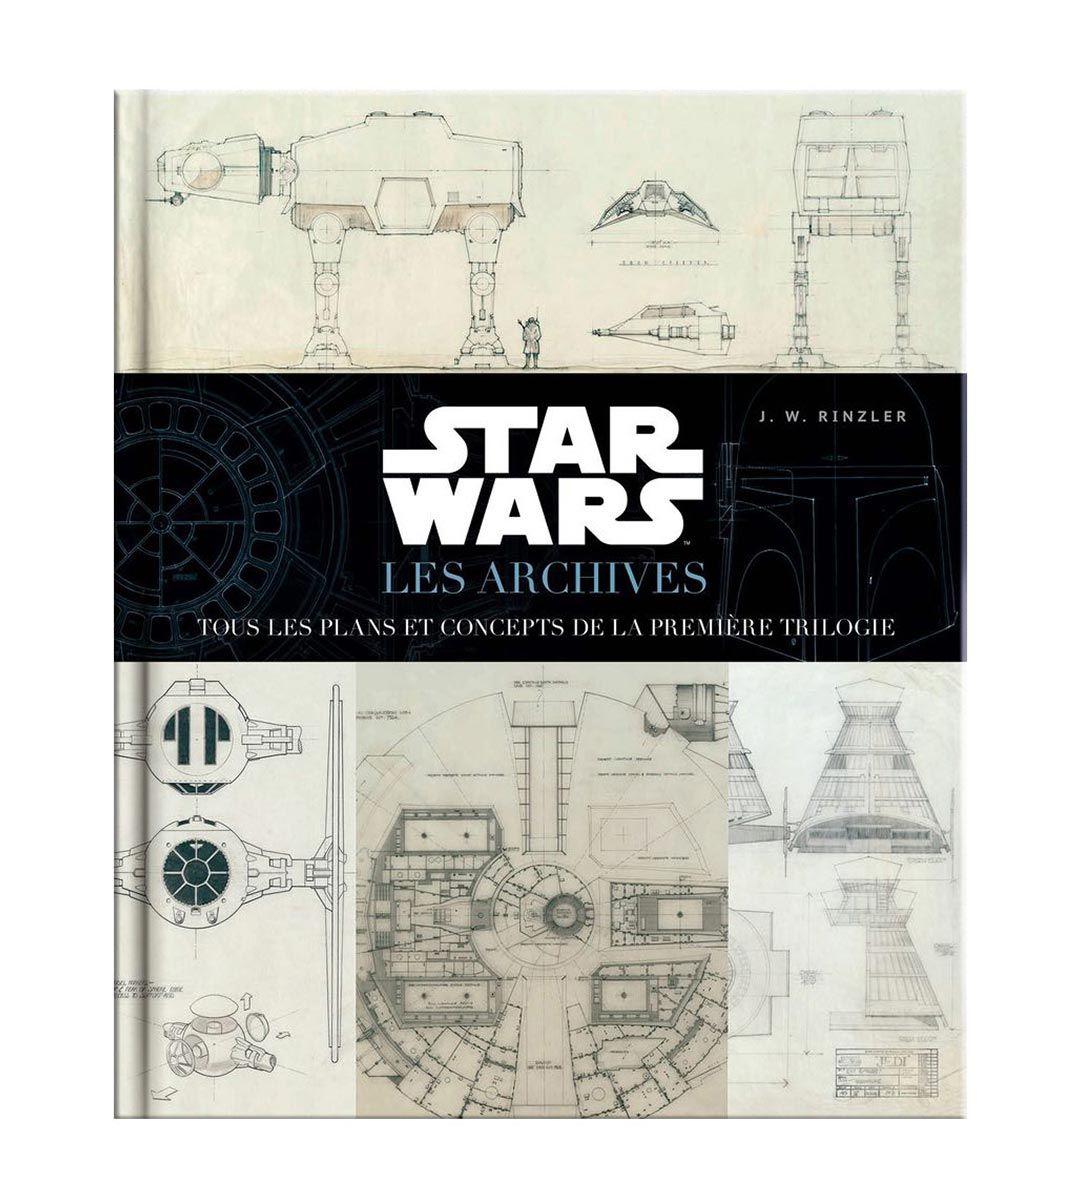 Star Wars Archives , plans and concepts